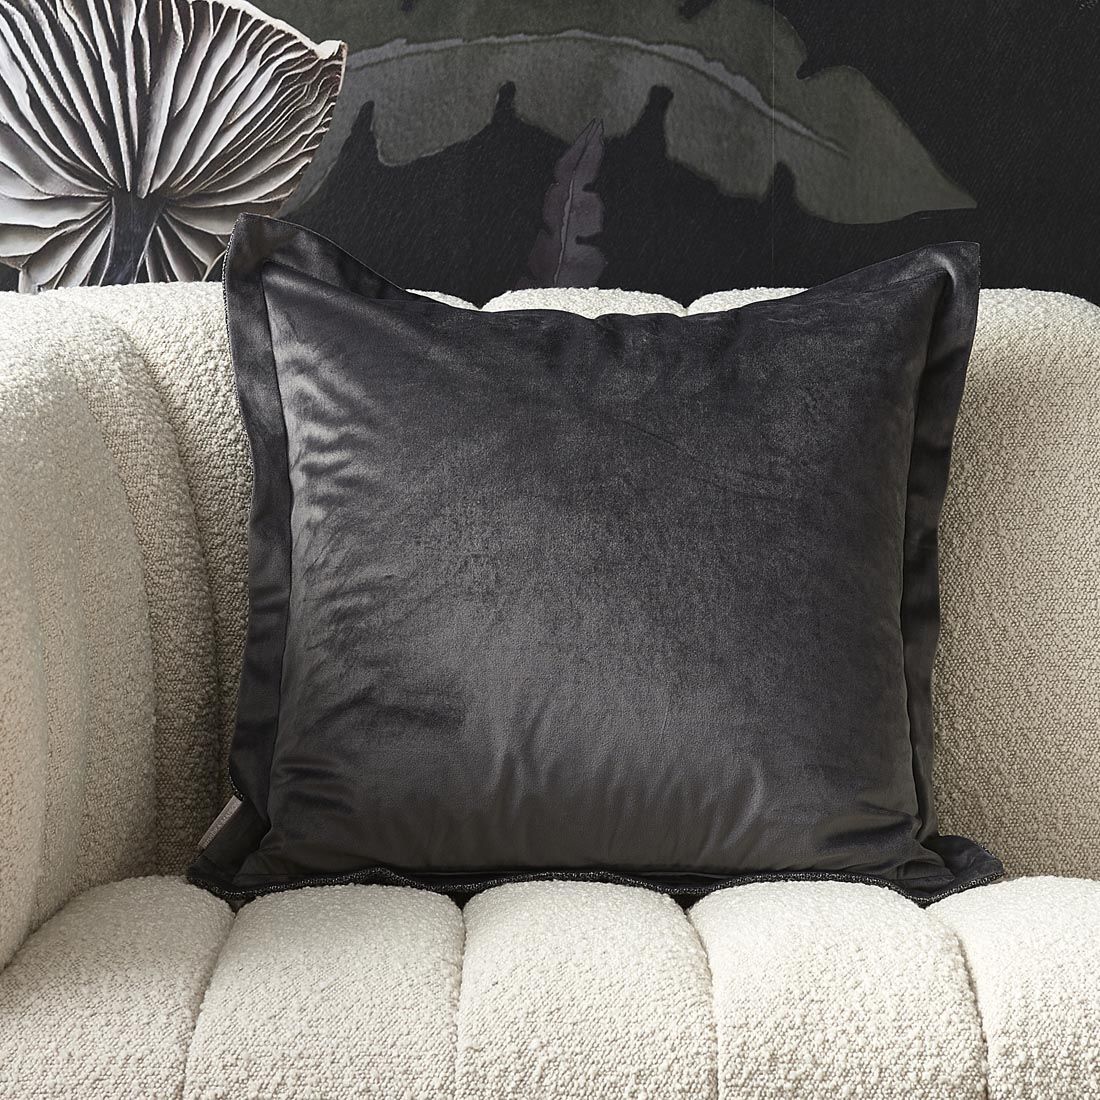 Rugged Luxury Pillow Cover 50x50 grey